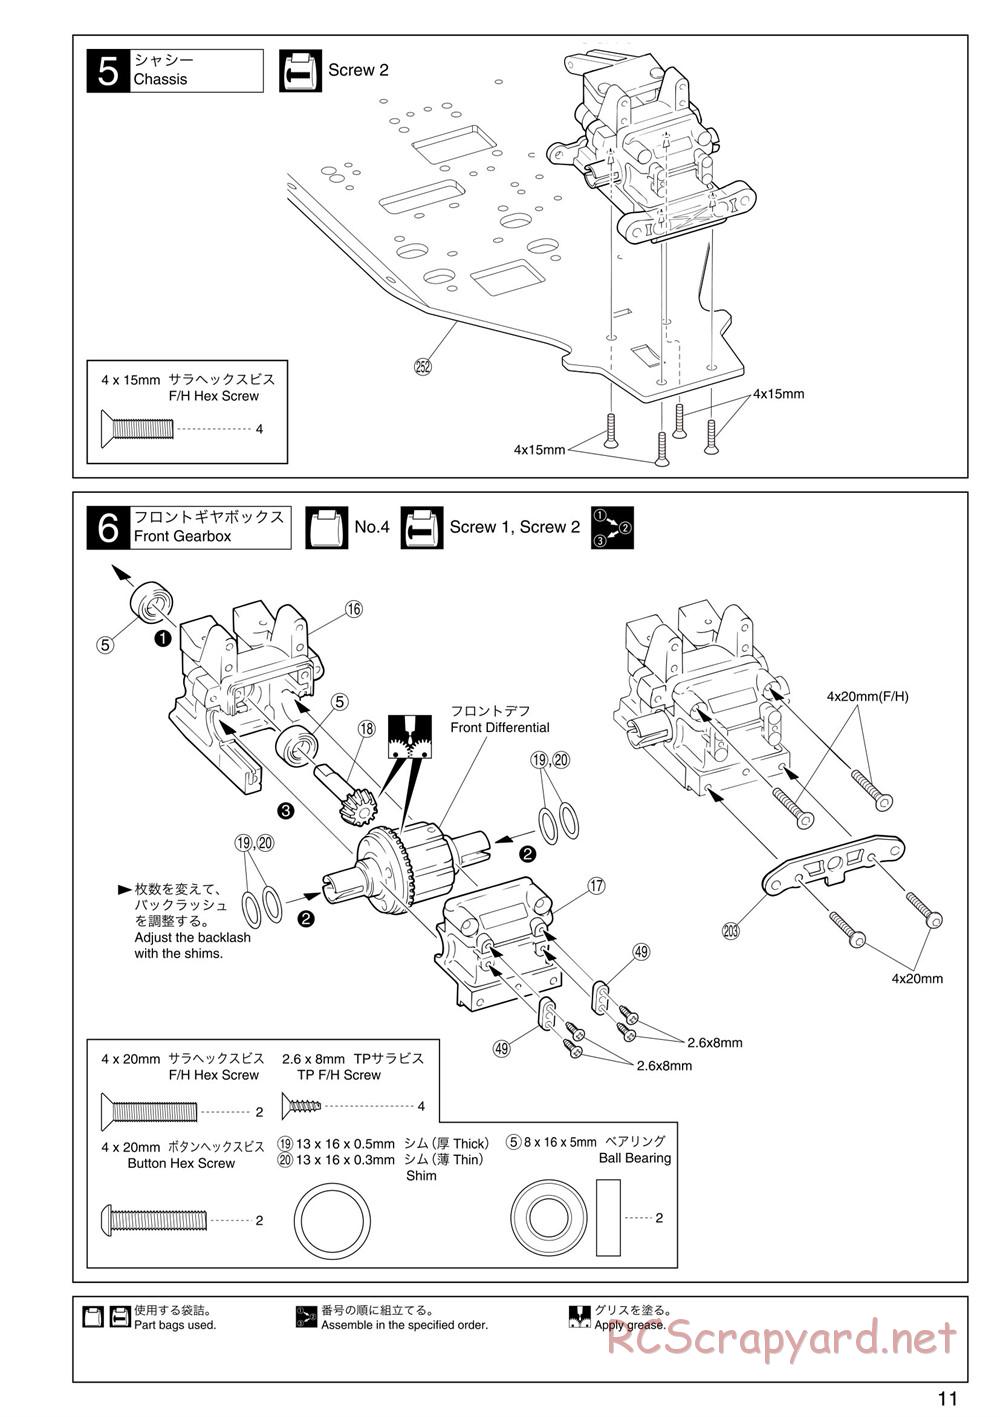 Kyosho - Inferno GT2 - Manual - Page 11